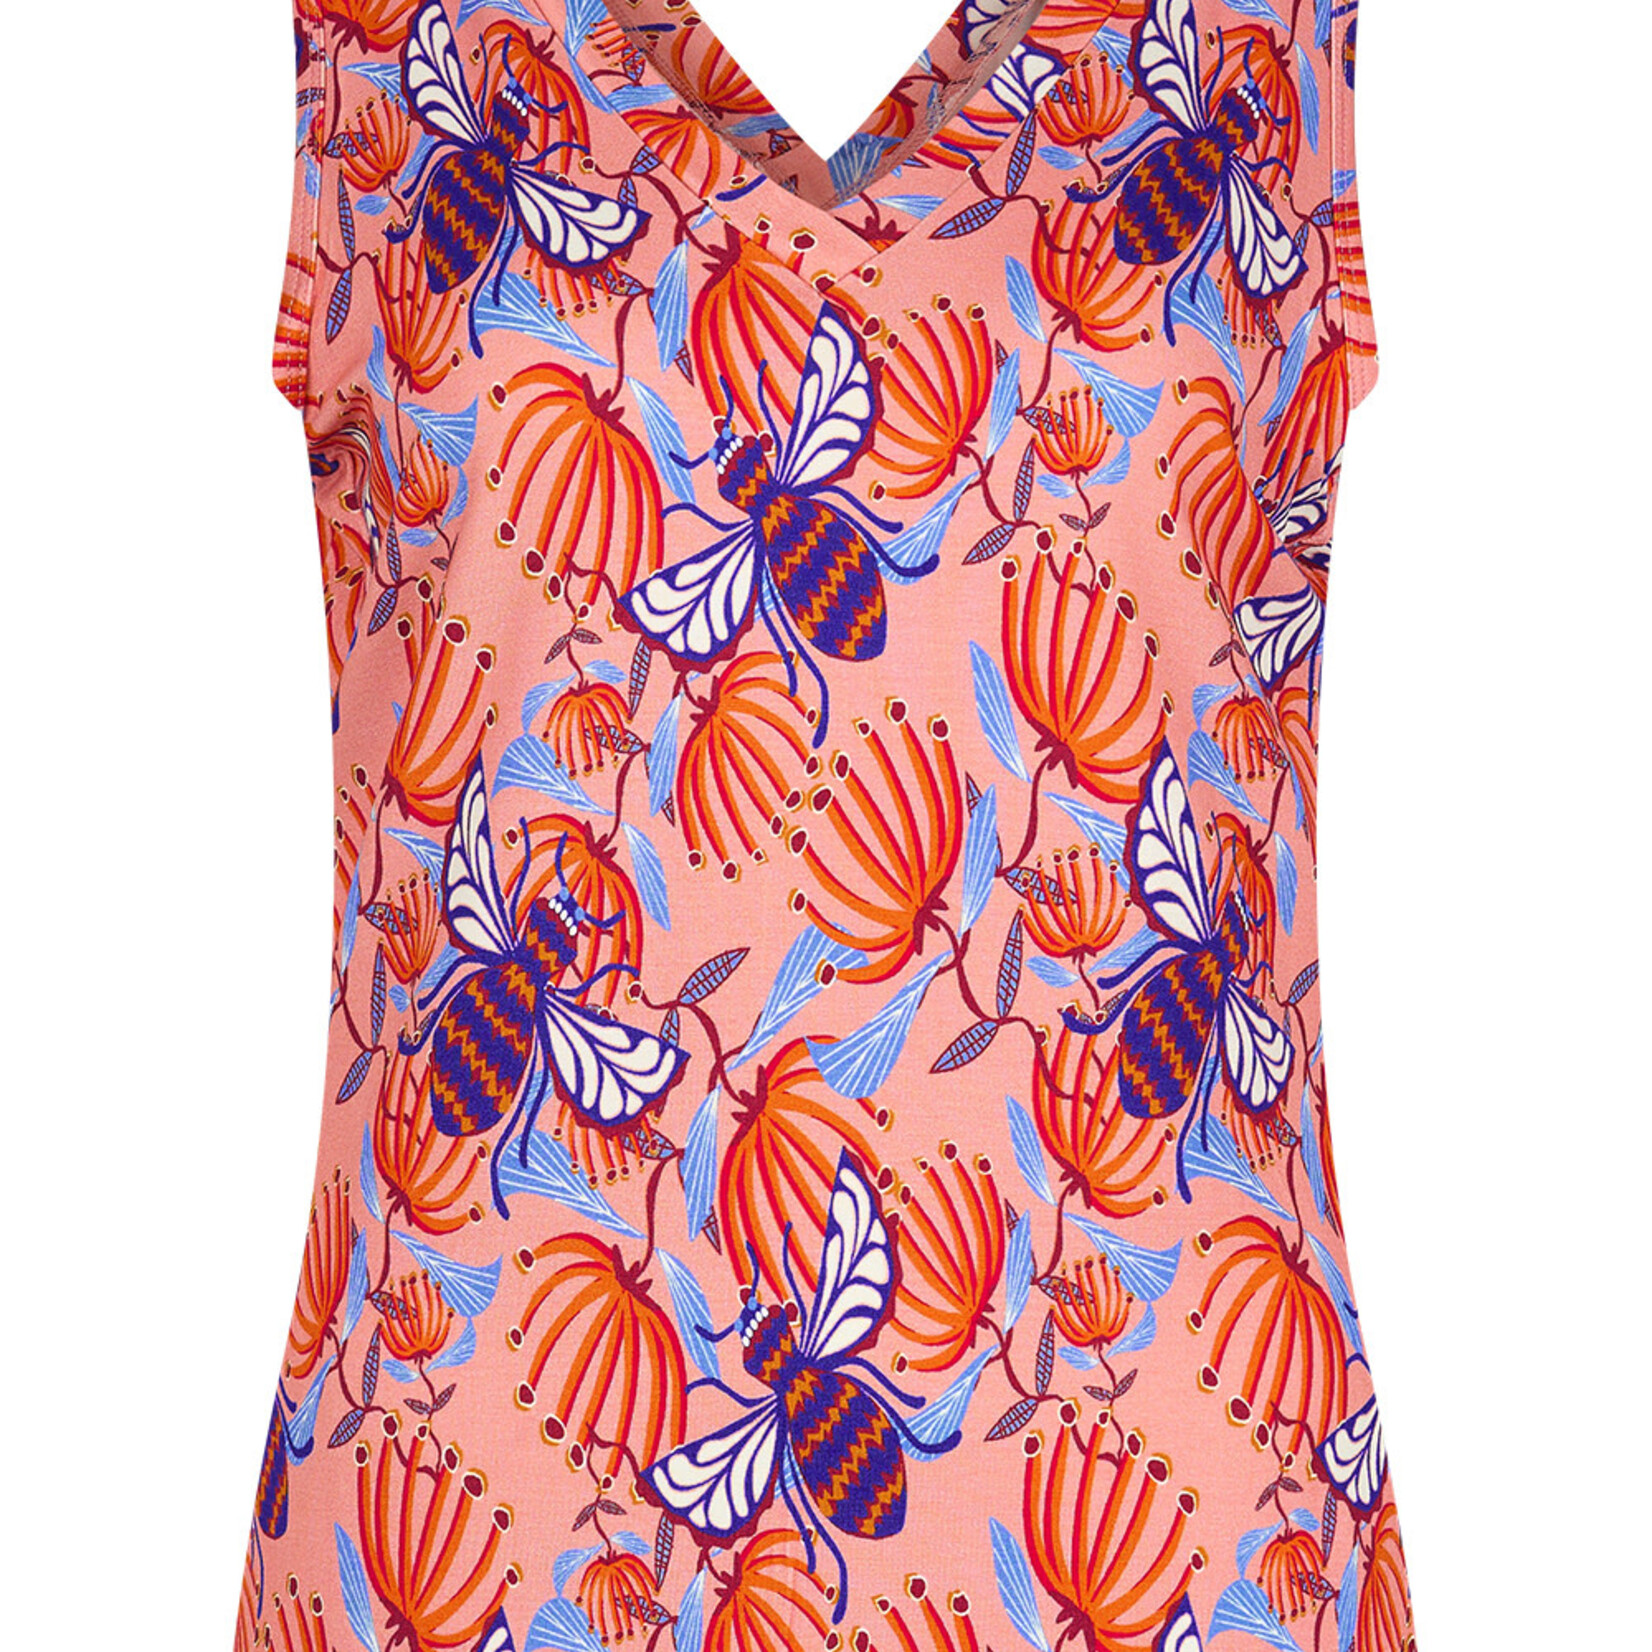 BAKERY LADIES BAKERY LADIES SINGLET SIMONE BEE AND ORCHID SHELL